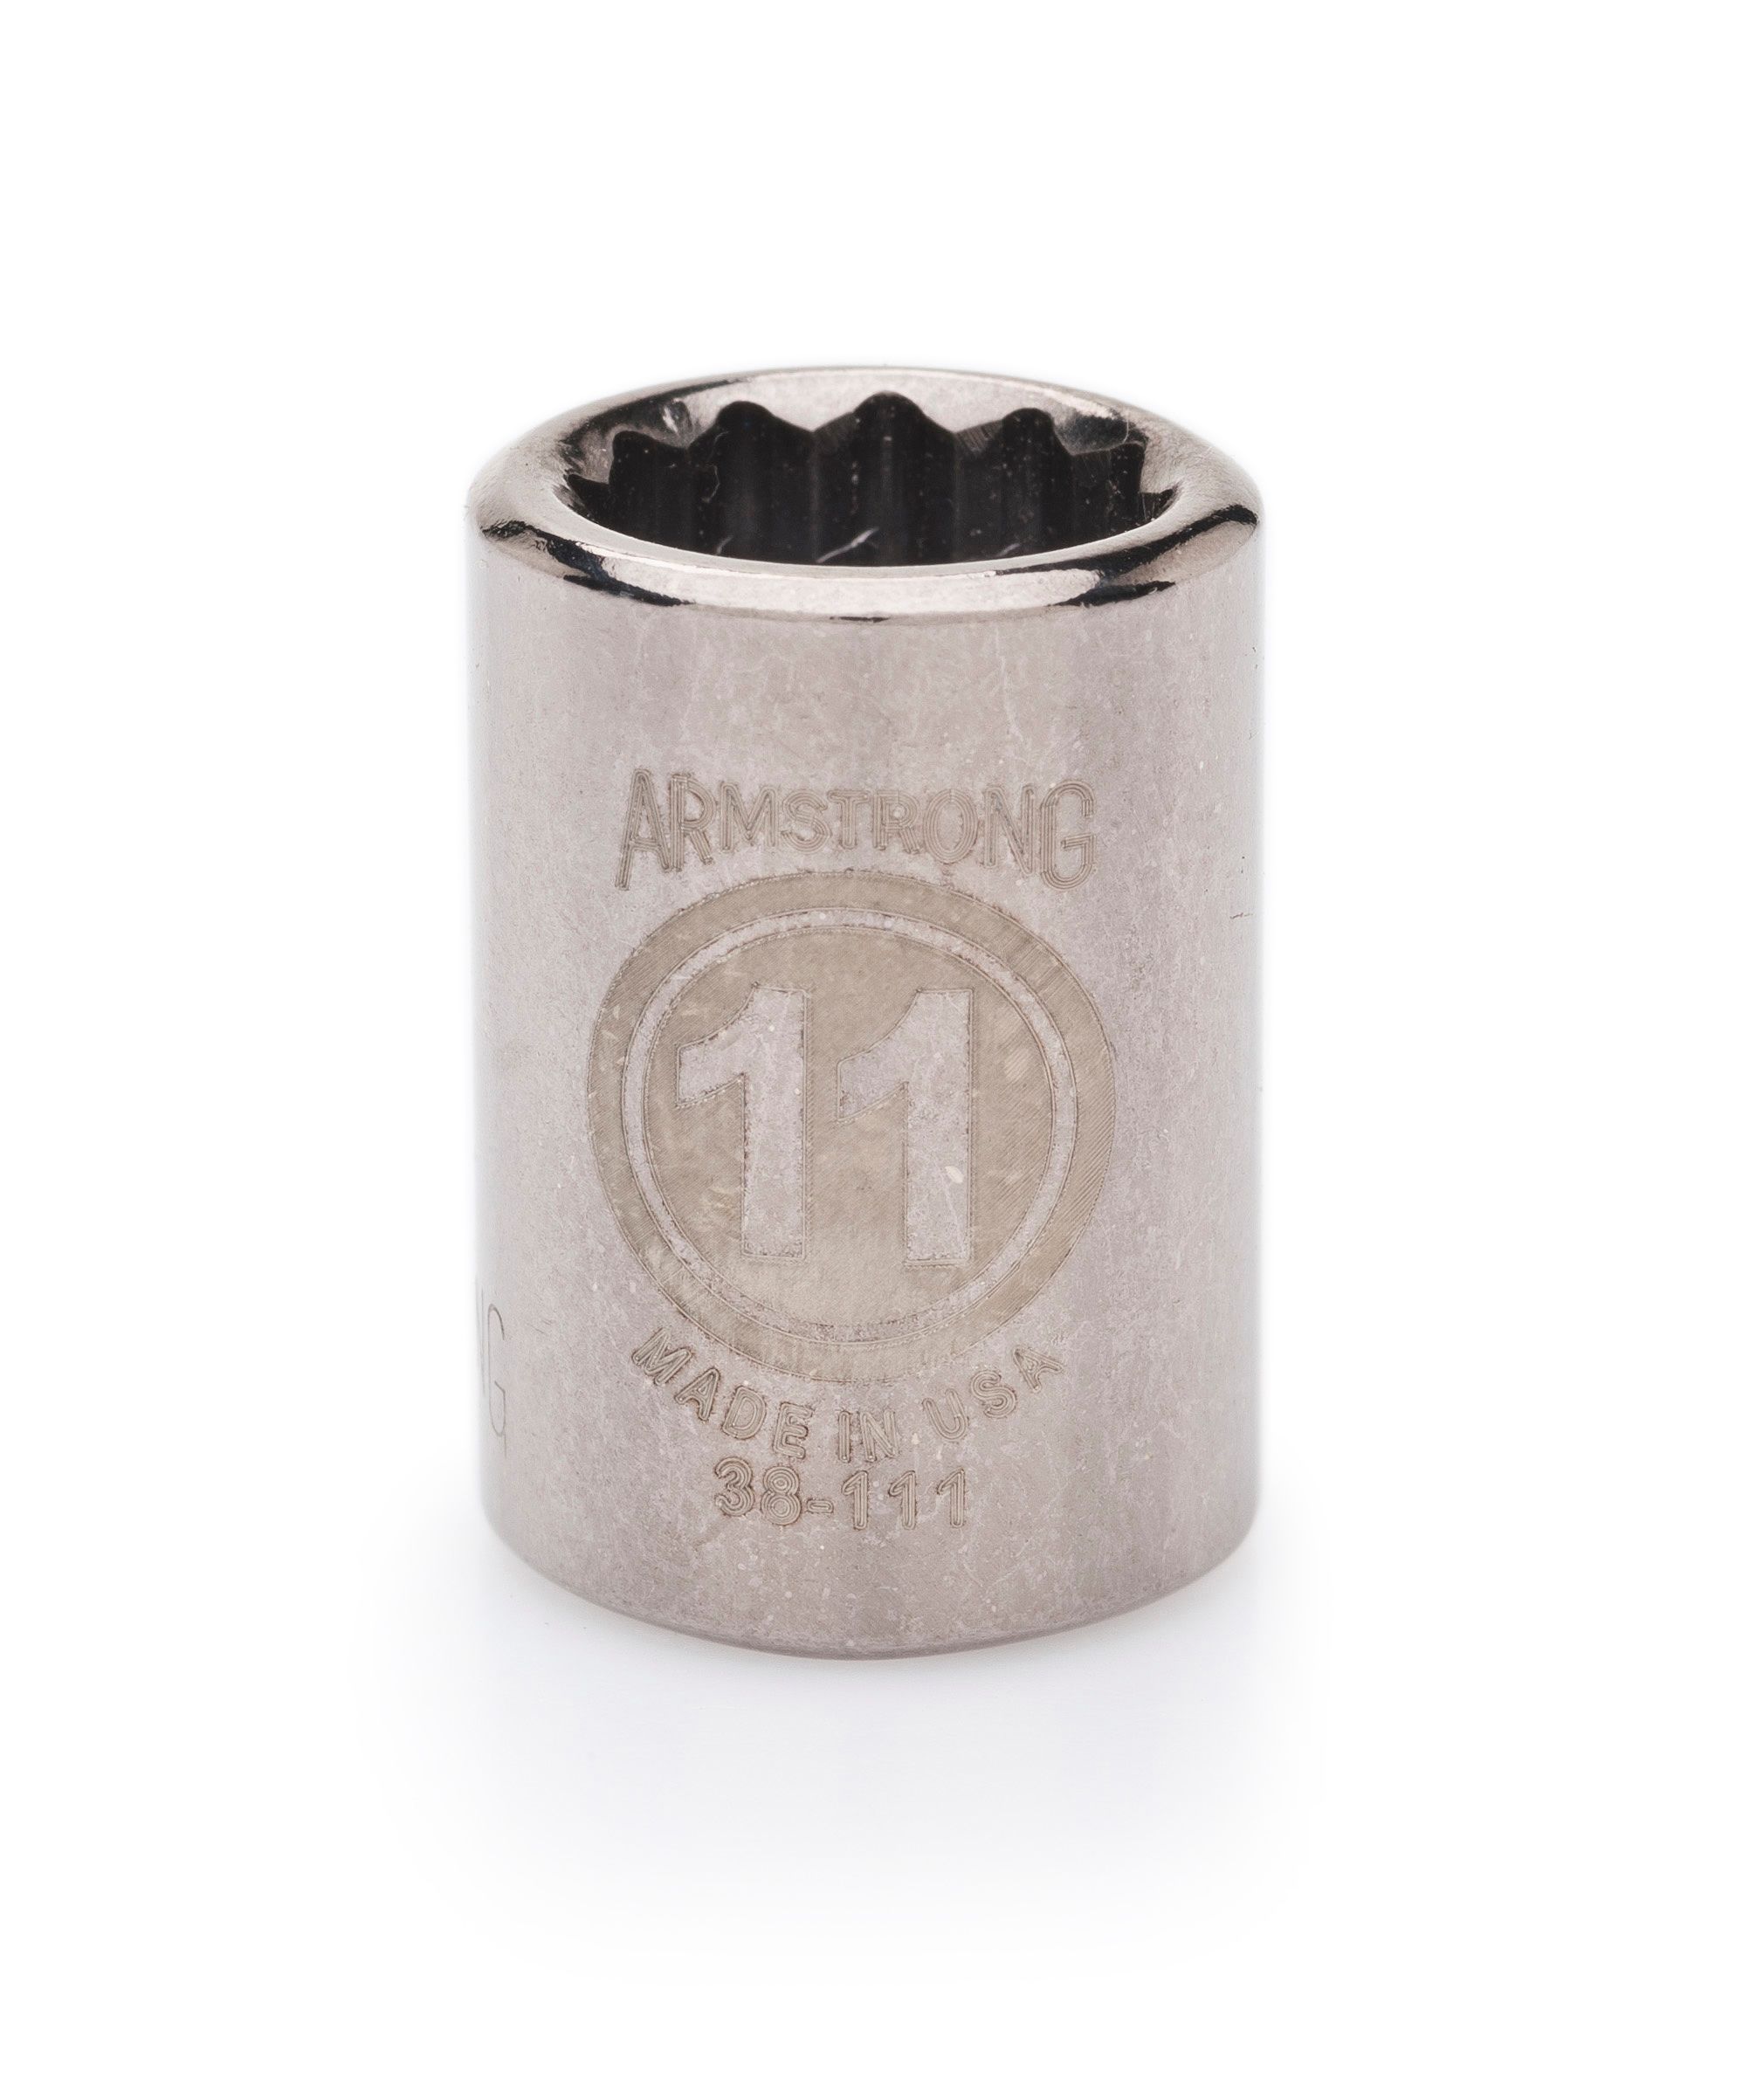 Armstrong Tools 3/8" Drive 17mm 12-point Standard Socket